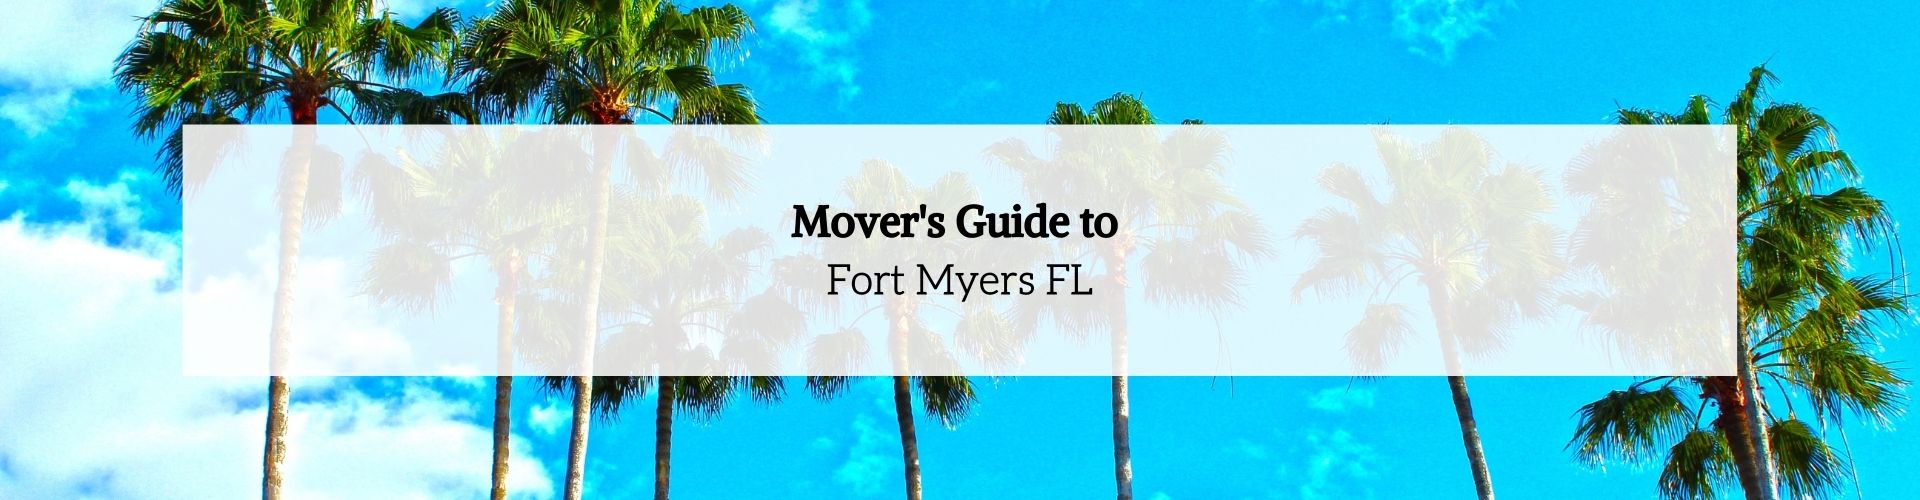 Mover's Guide Fort Myers FL